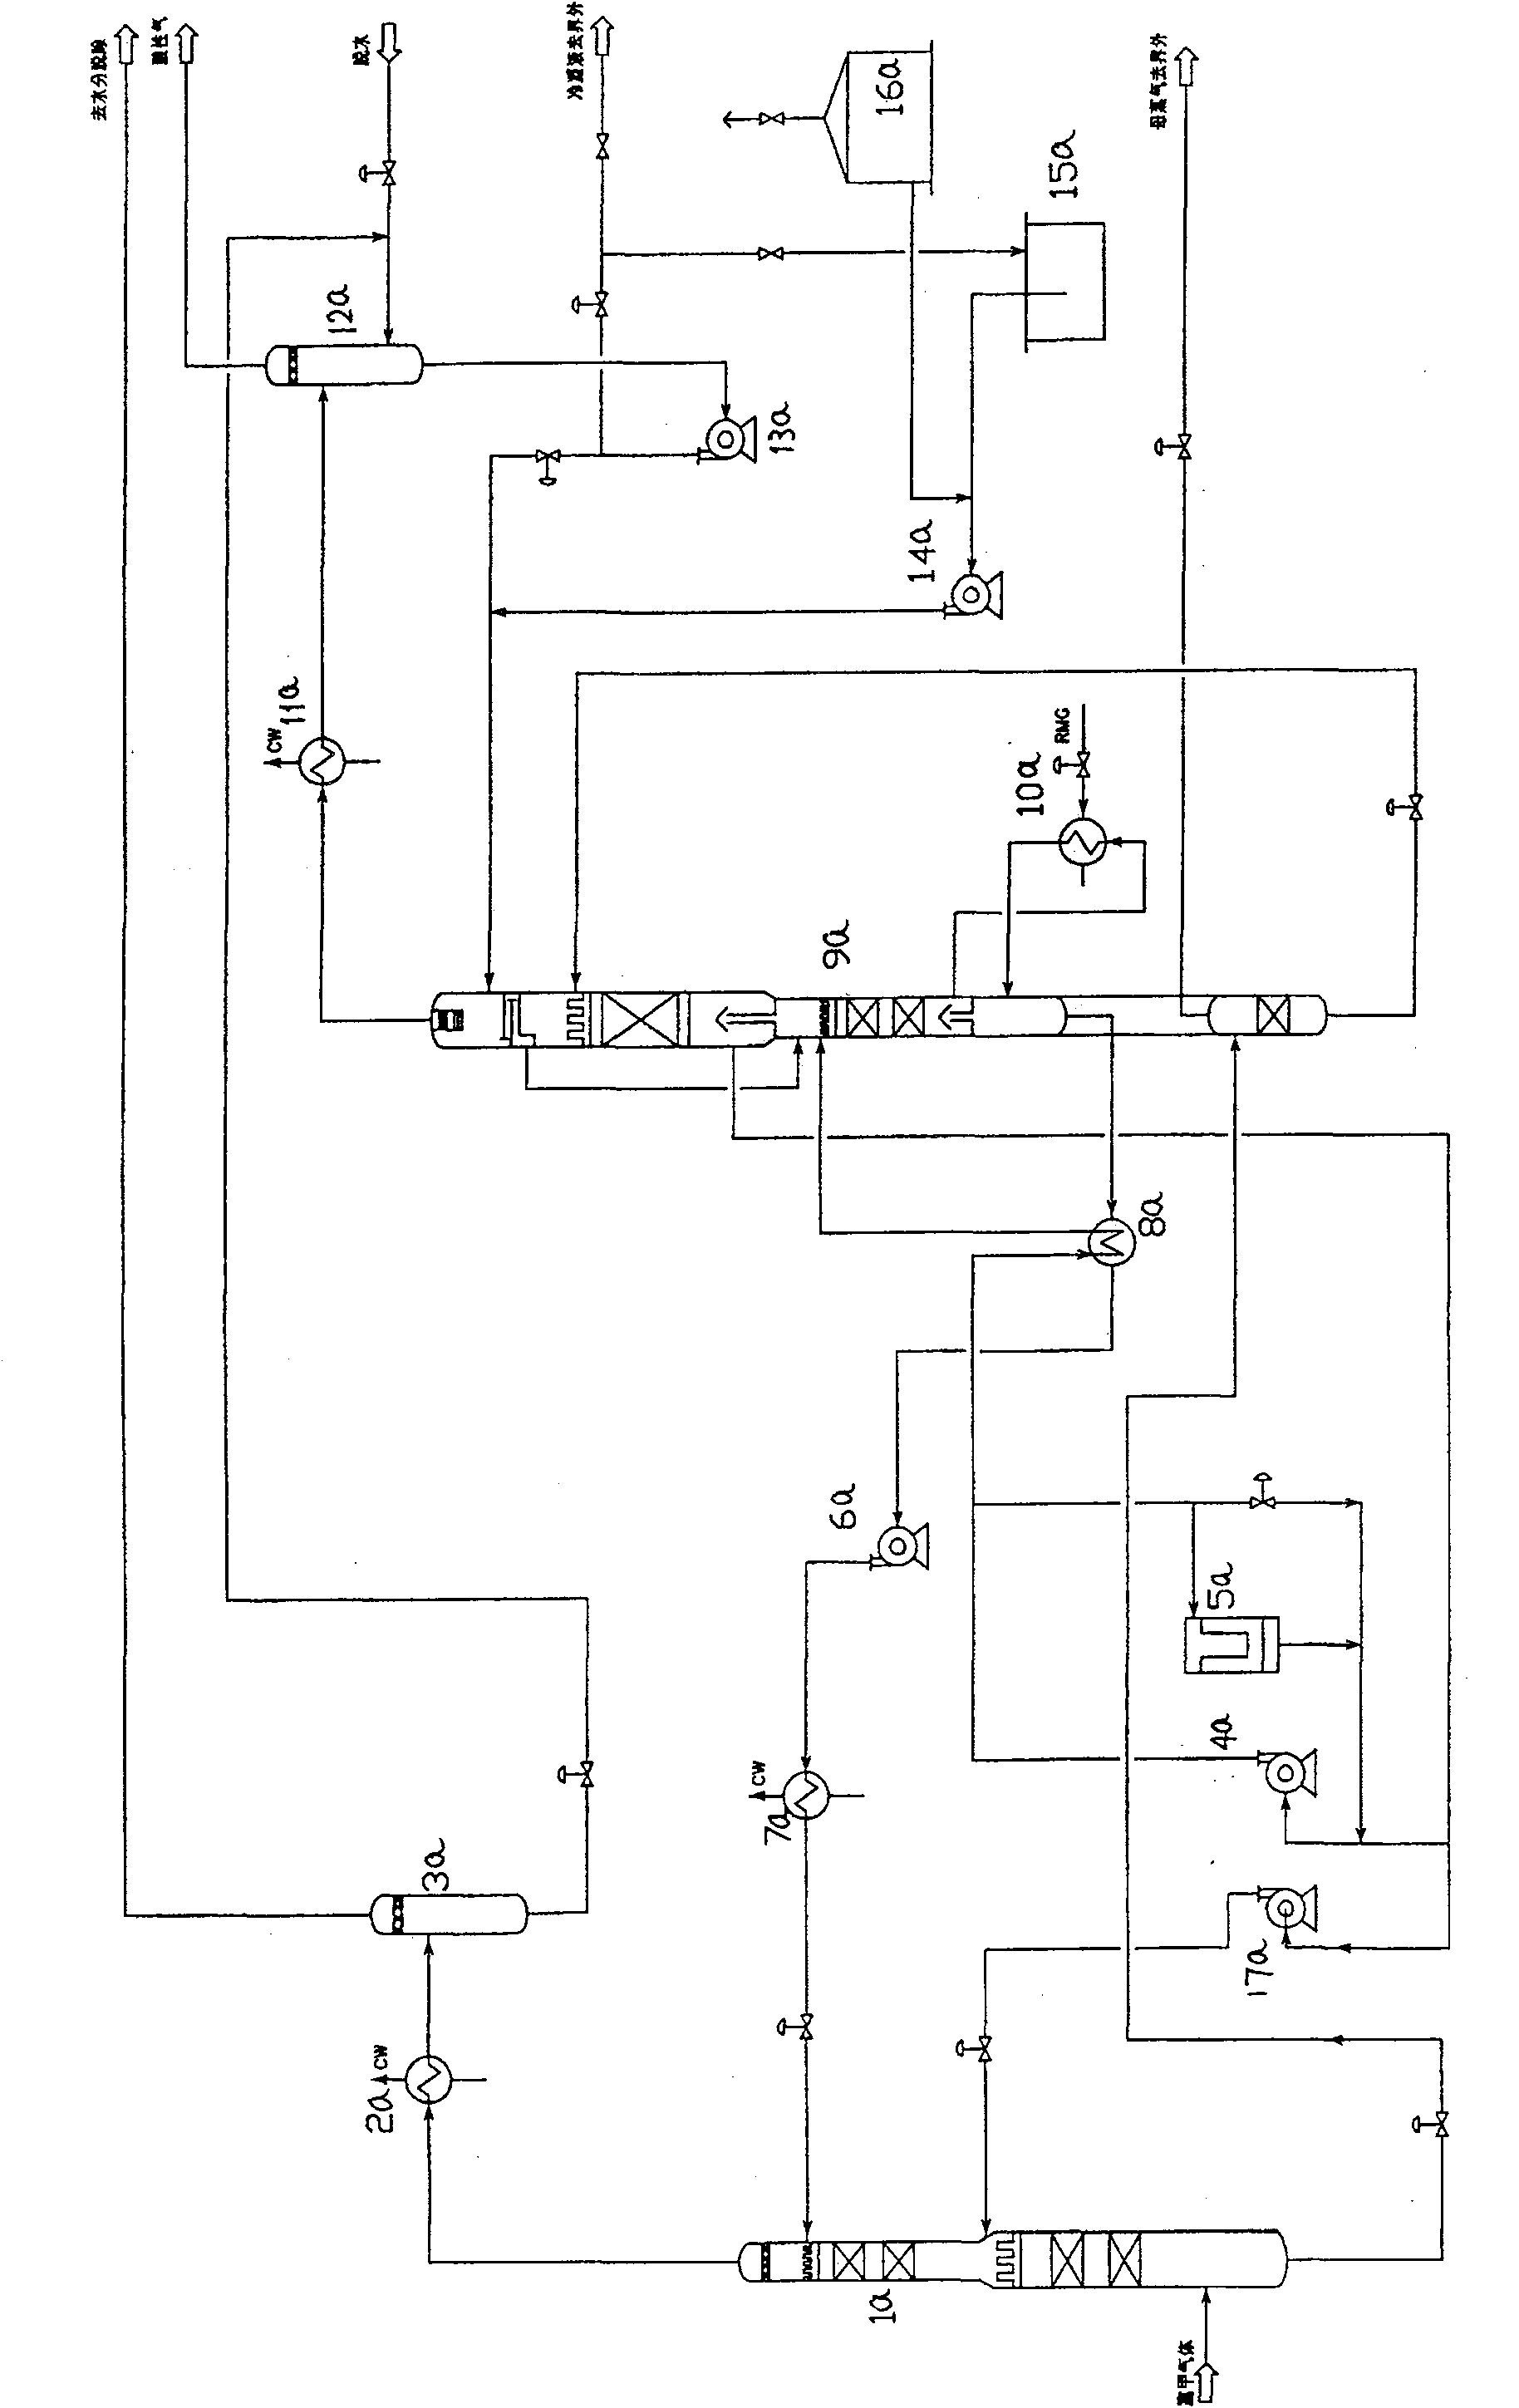 Front end combination purification technique for producing liquefied natural gas from mixture gas rich-containing methane